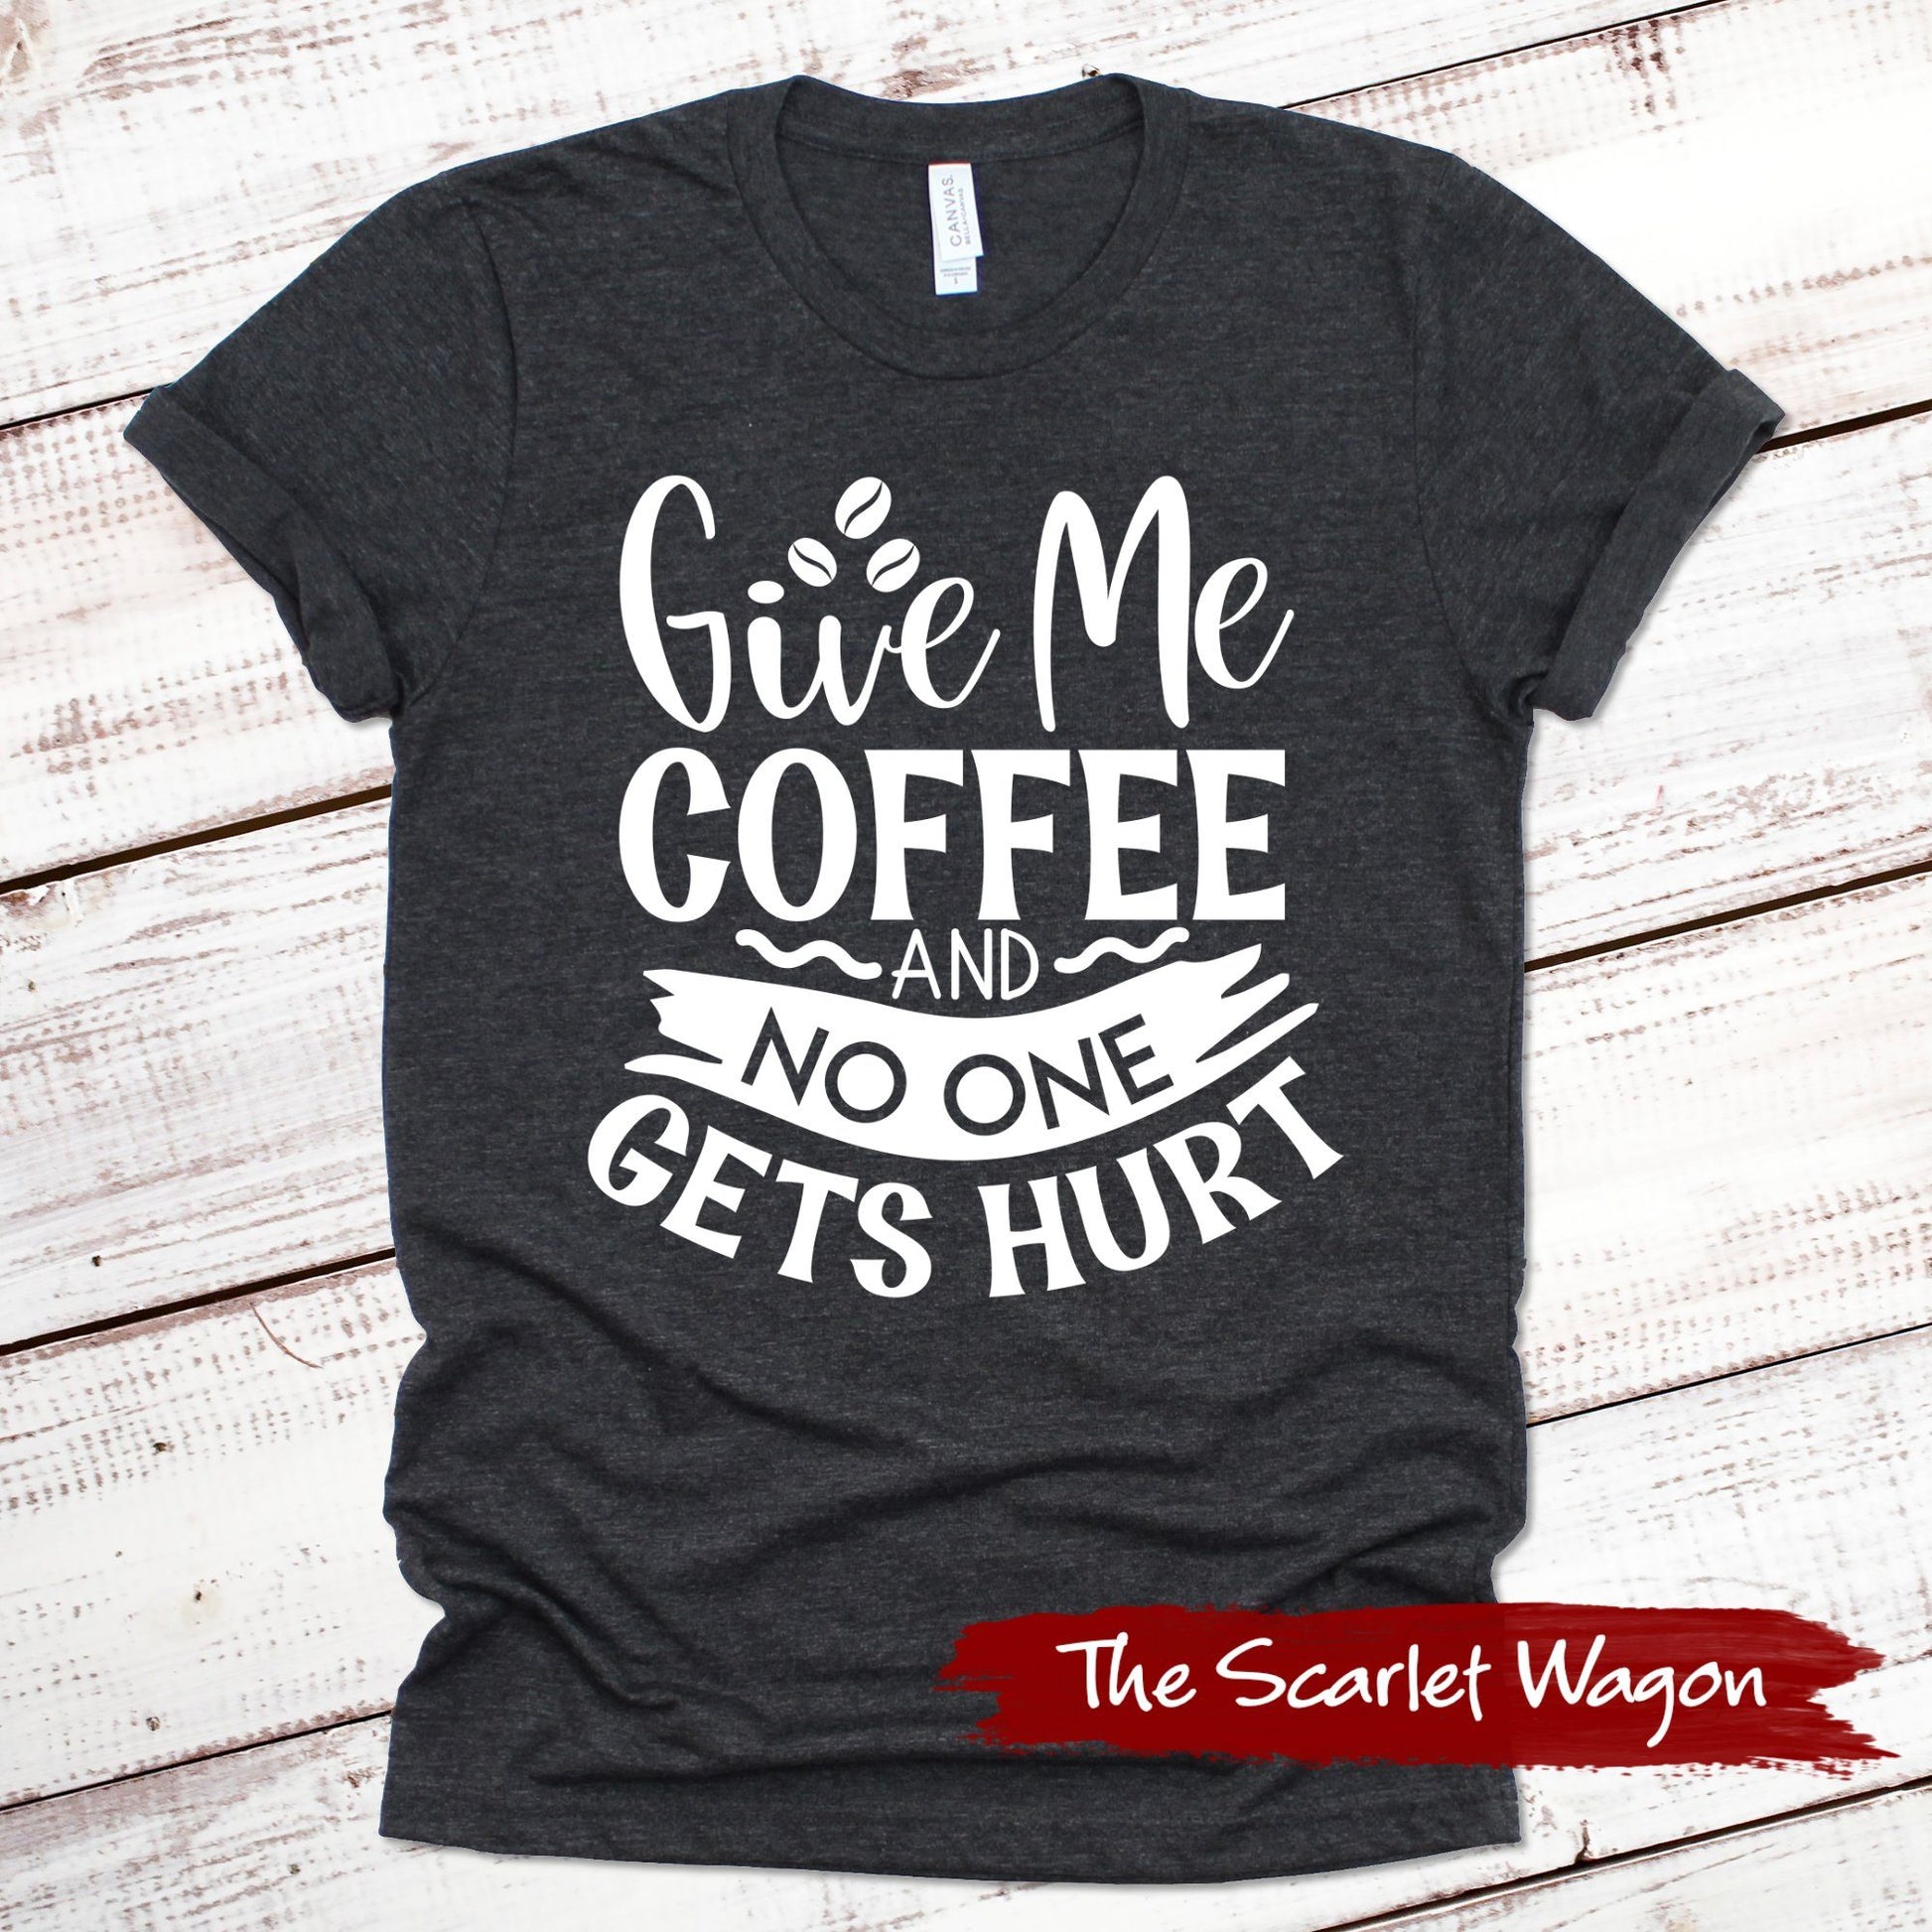 Give Me Coffee and No One Gets Hurt Funny Shirt Scarlet Wagon Dark Gray Heather XS 